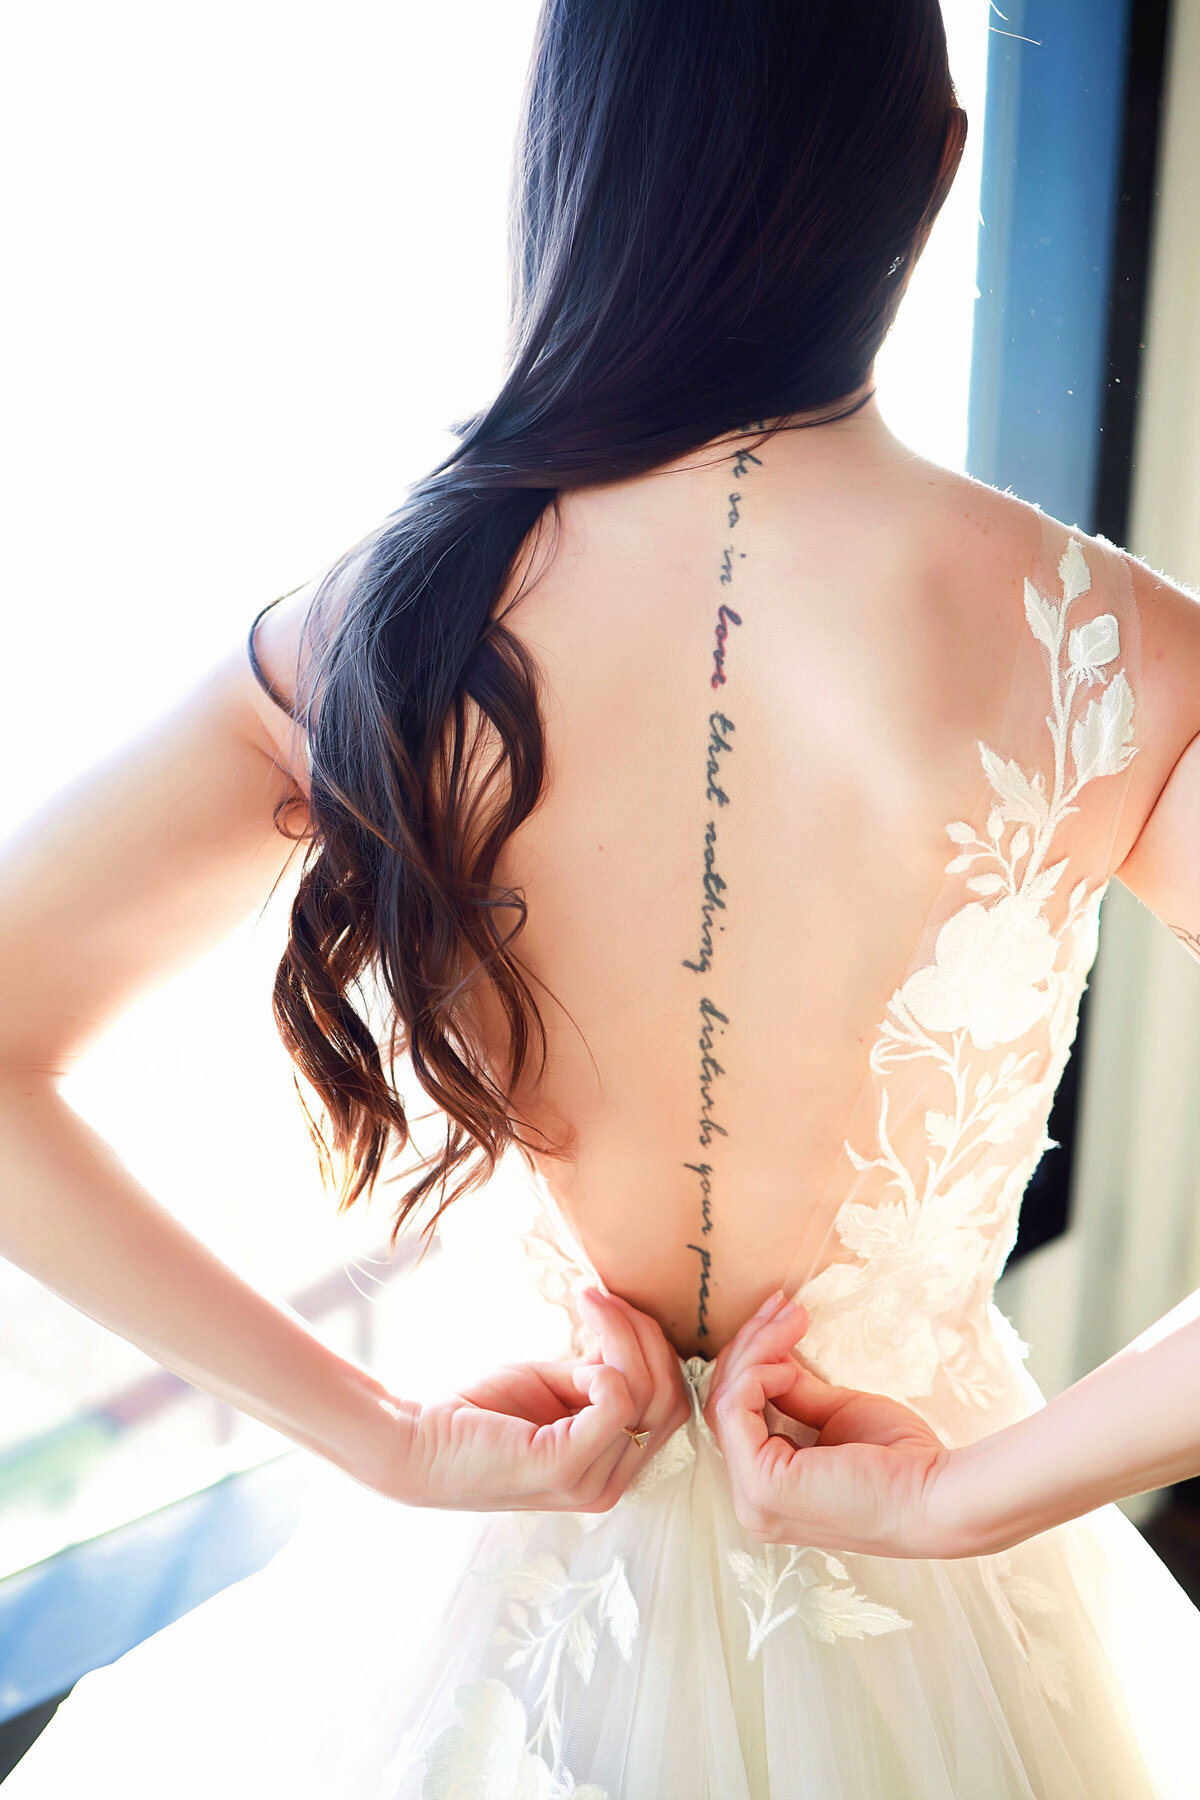 A bride buttoning her dress, with a beautiful back tattoo showing.